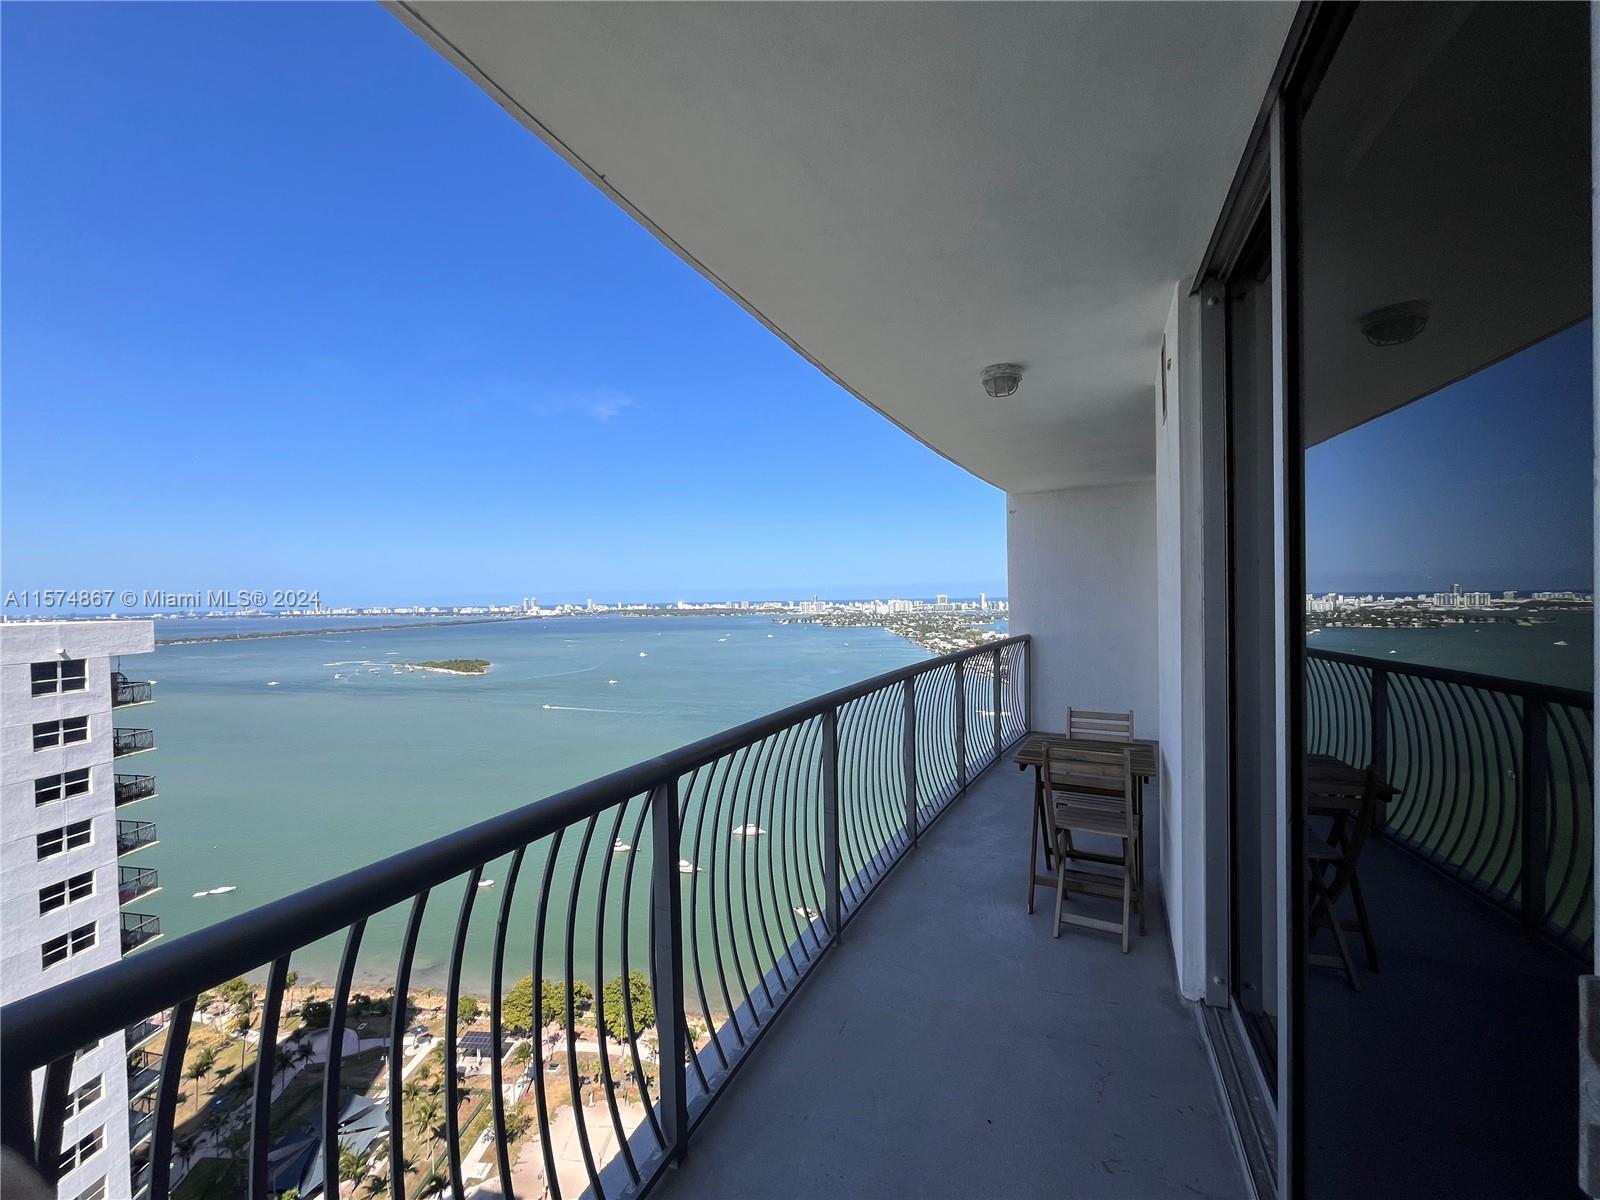 One bedroom one bathroom at Opera Tower overlooking Biscayne Bay views from your balcony. Kitchen is fully equipped with granite counter top and stainless steel appliances, washer and dryer inside unit, spacious bedroom with walking closet. Building offers gym, sauna, BBQ area, social room, pool, jacuzzi and Security front desk and valet parking 24/7. Opera Tower Edgewater location is conveniently located near restaurants, shops, Publix and much more.